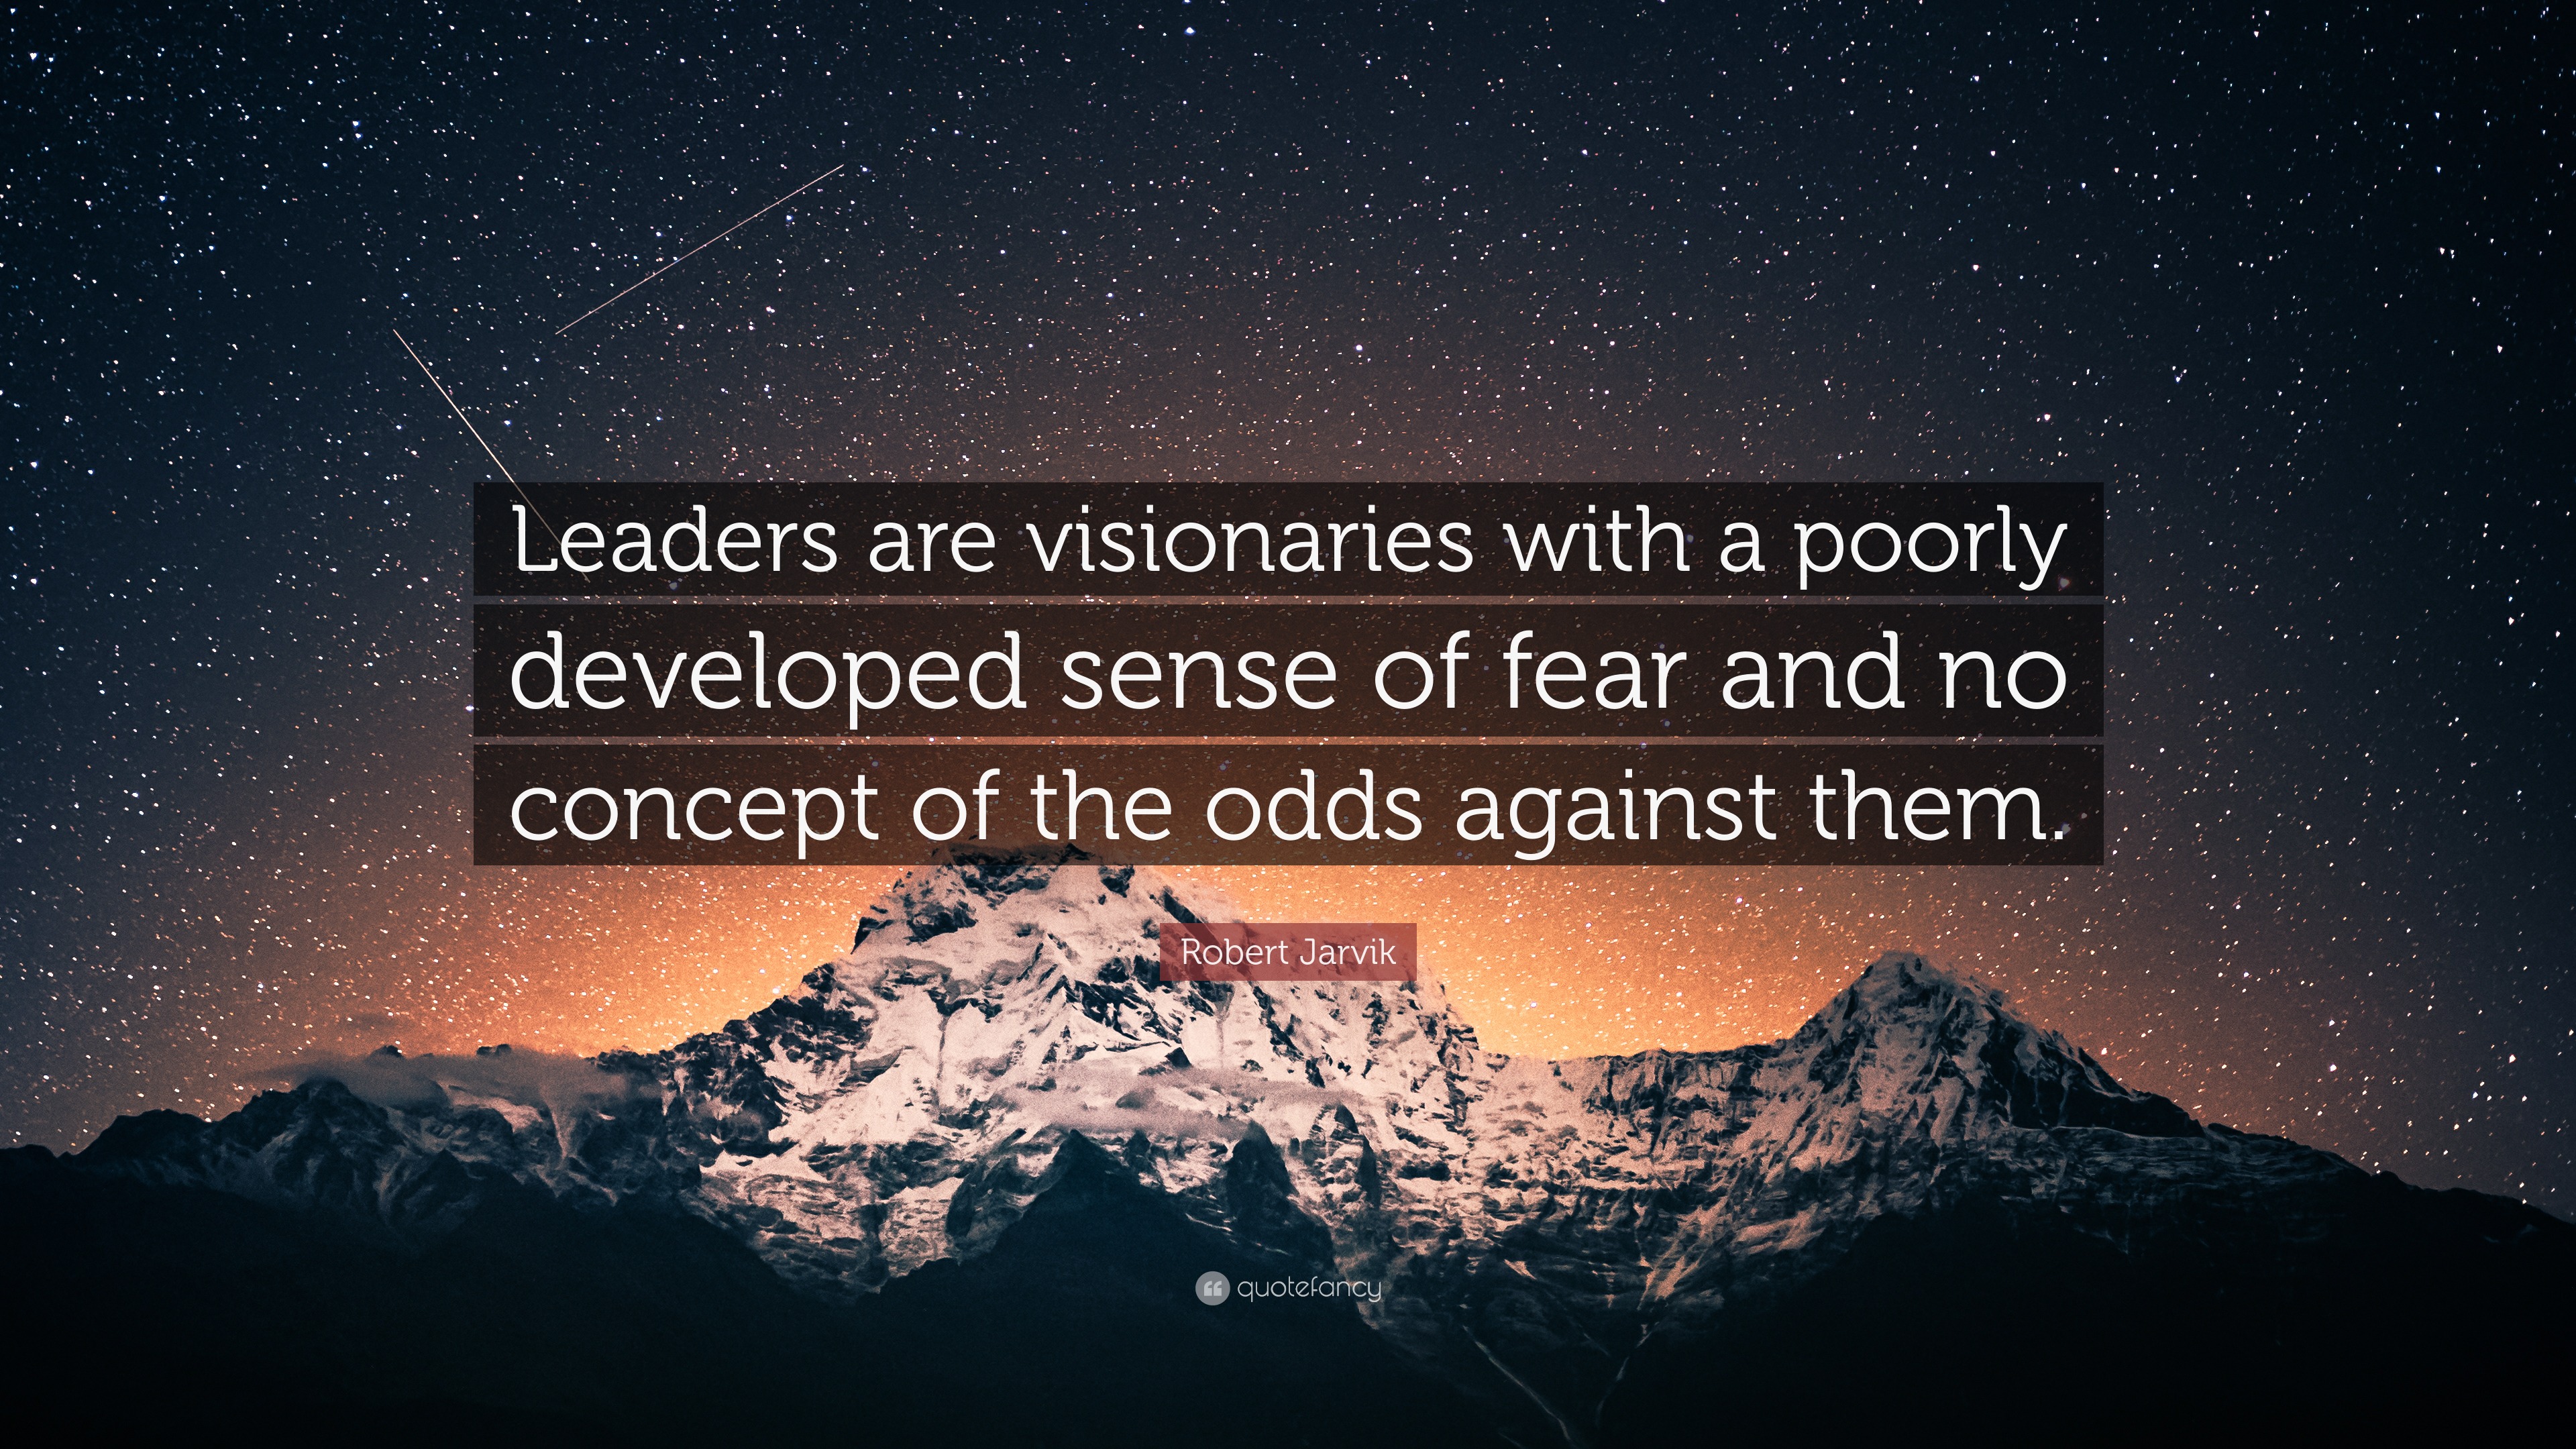 Robert Jarvik Quote: “Leaders are visionaries with a poorly developed ...